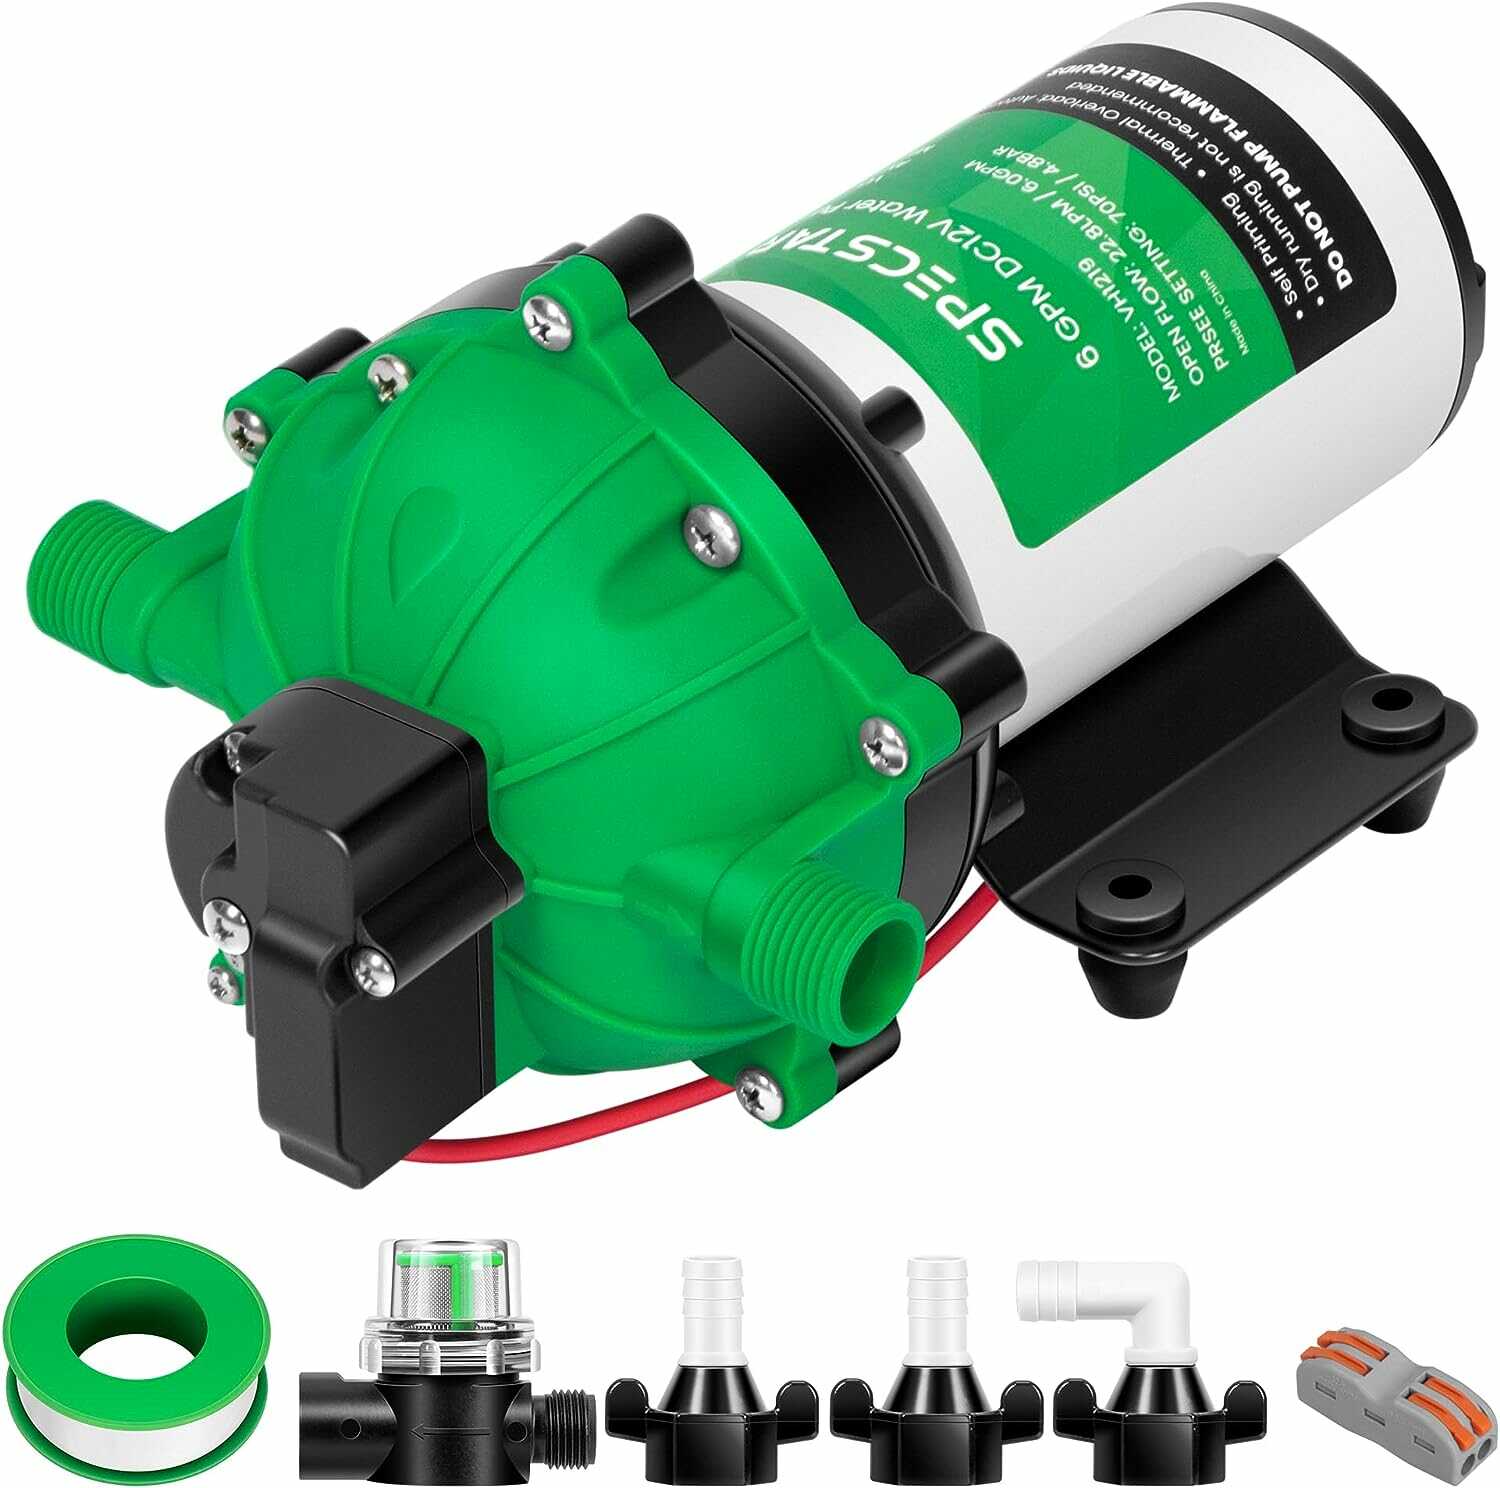 Water-proof Efficient And Requisite diesel fuel pump 12v 